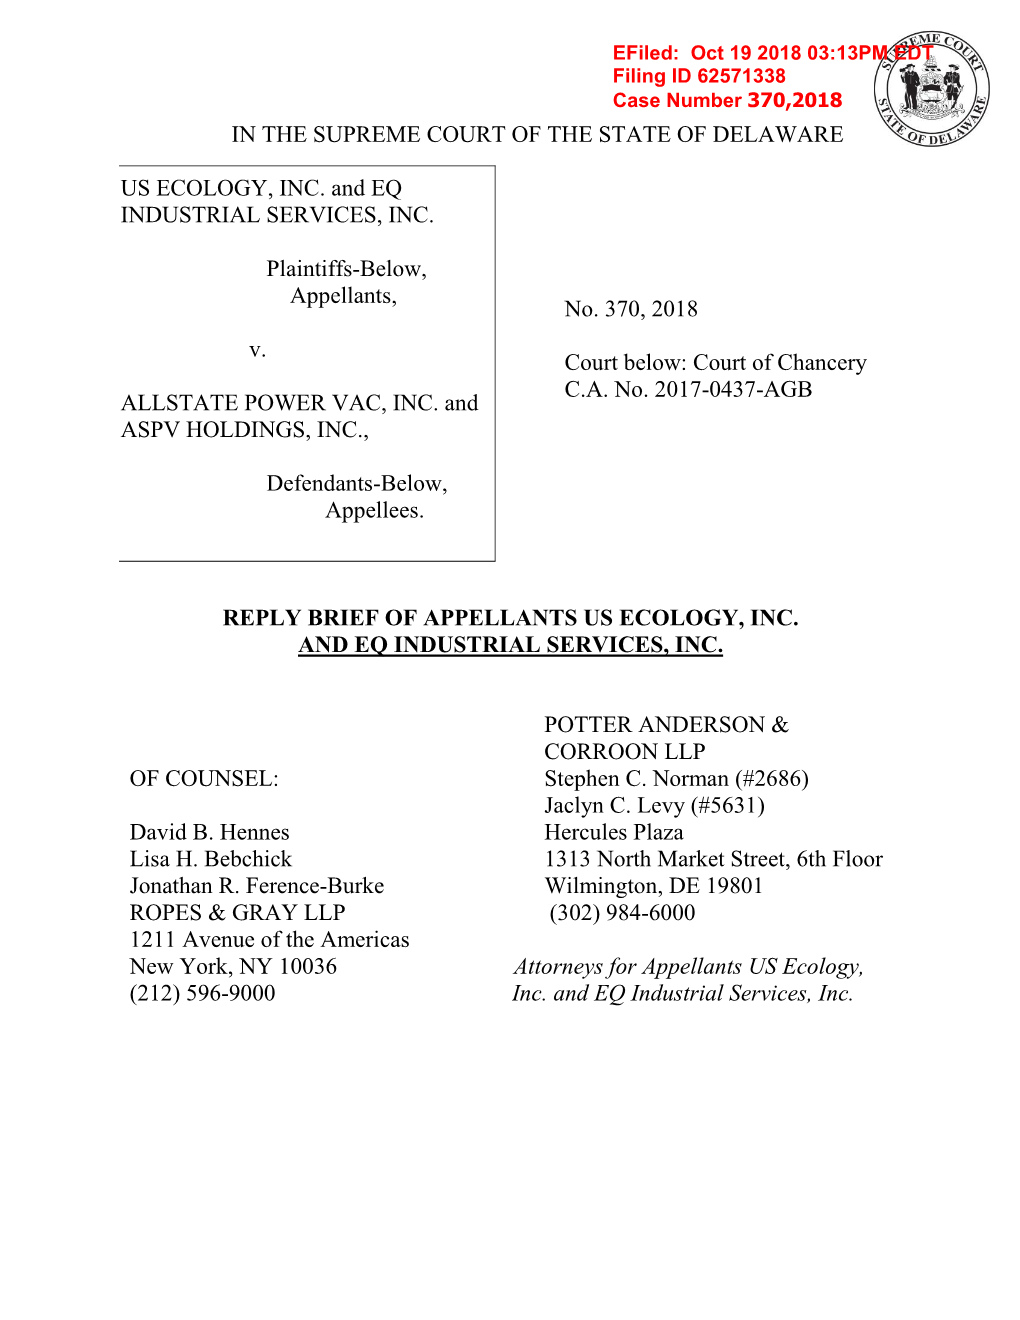 Reply Brief of Appellants Us Ecology, Inc